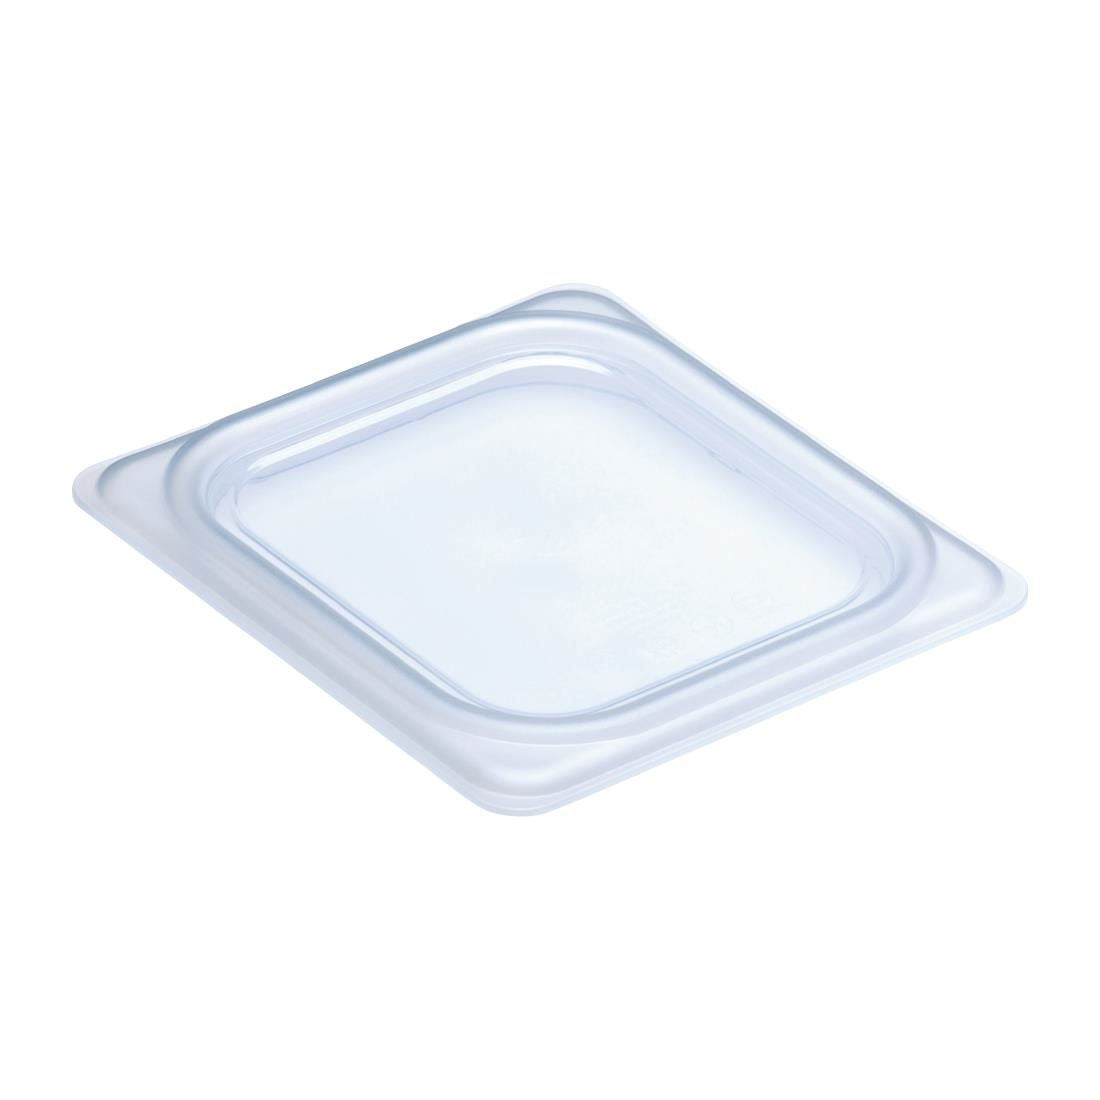 DM757 Cambro Polypropylene Gastronorm Pan 1/6 Soft Seal Lid JD Catering Equipment Solutions Ltd